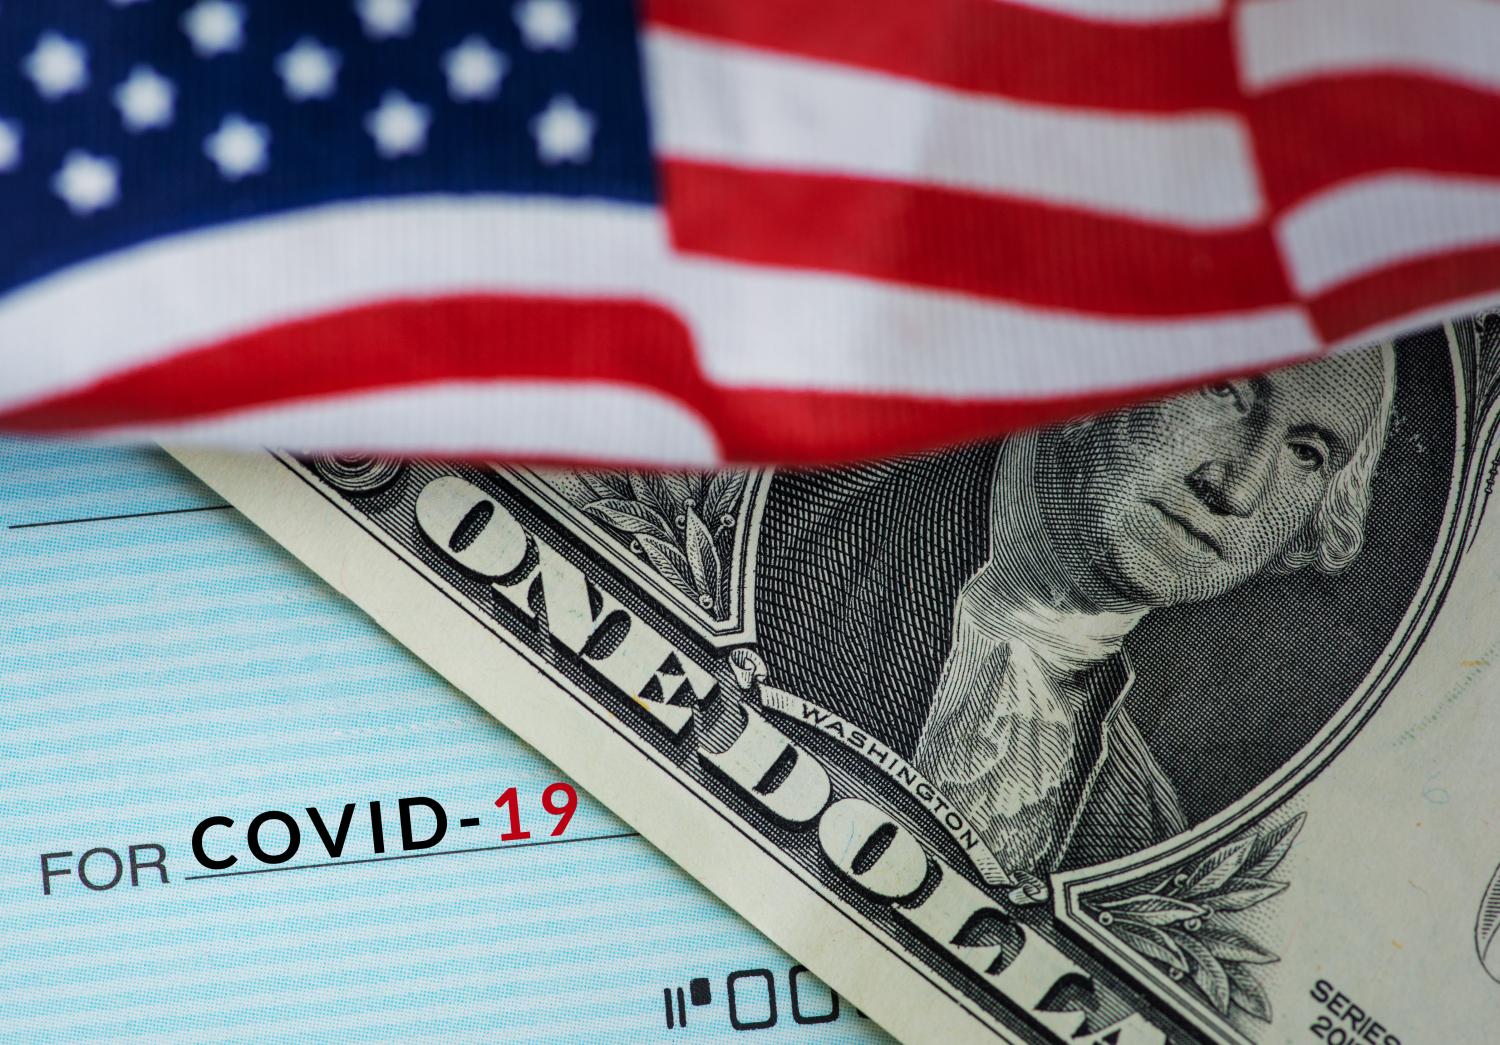 Image: US flag, dollar bill, COVID-19 relief check